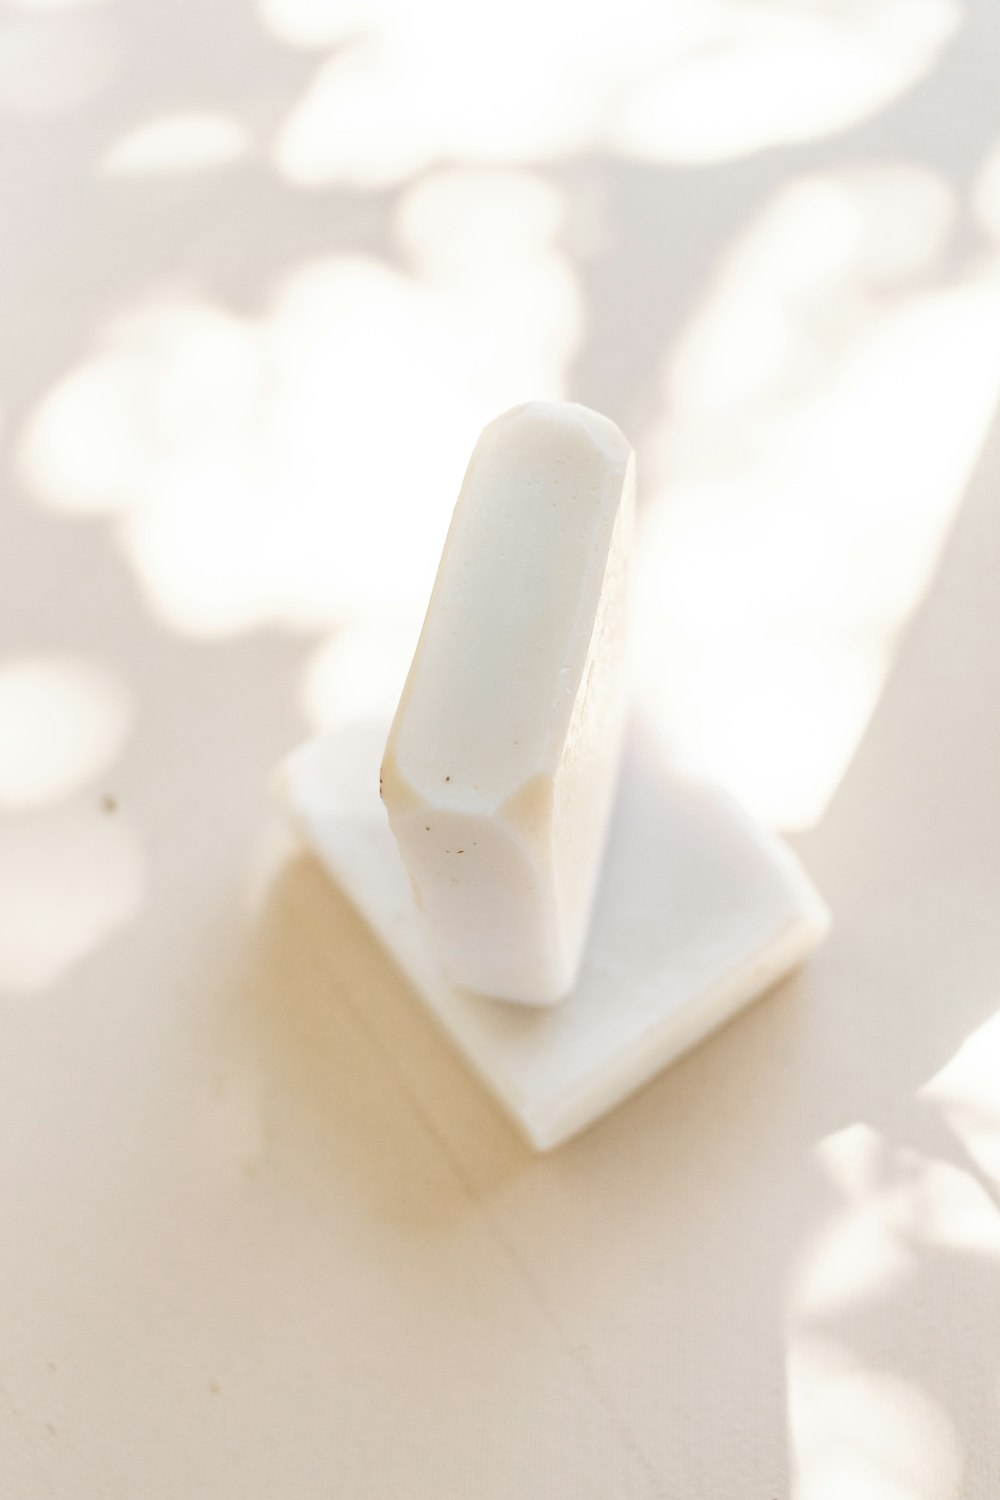 white plastic toy on white surface